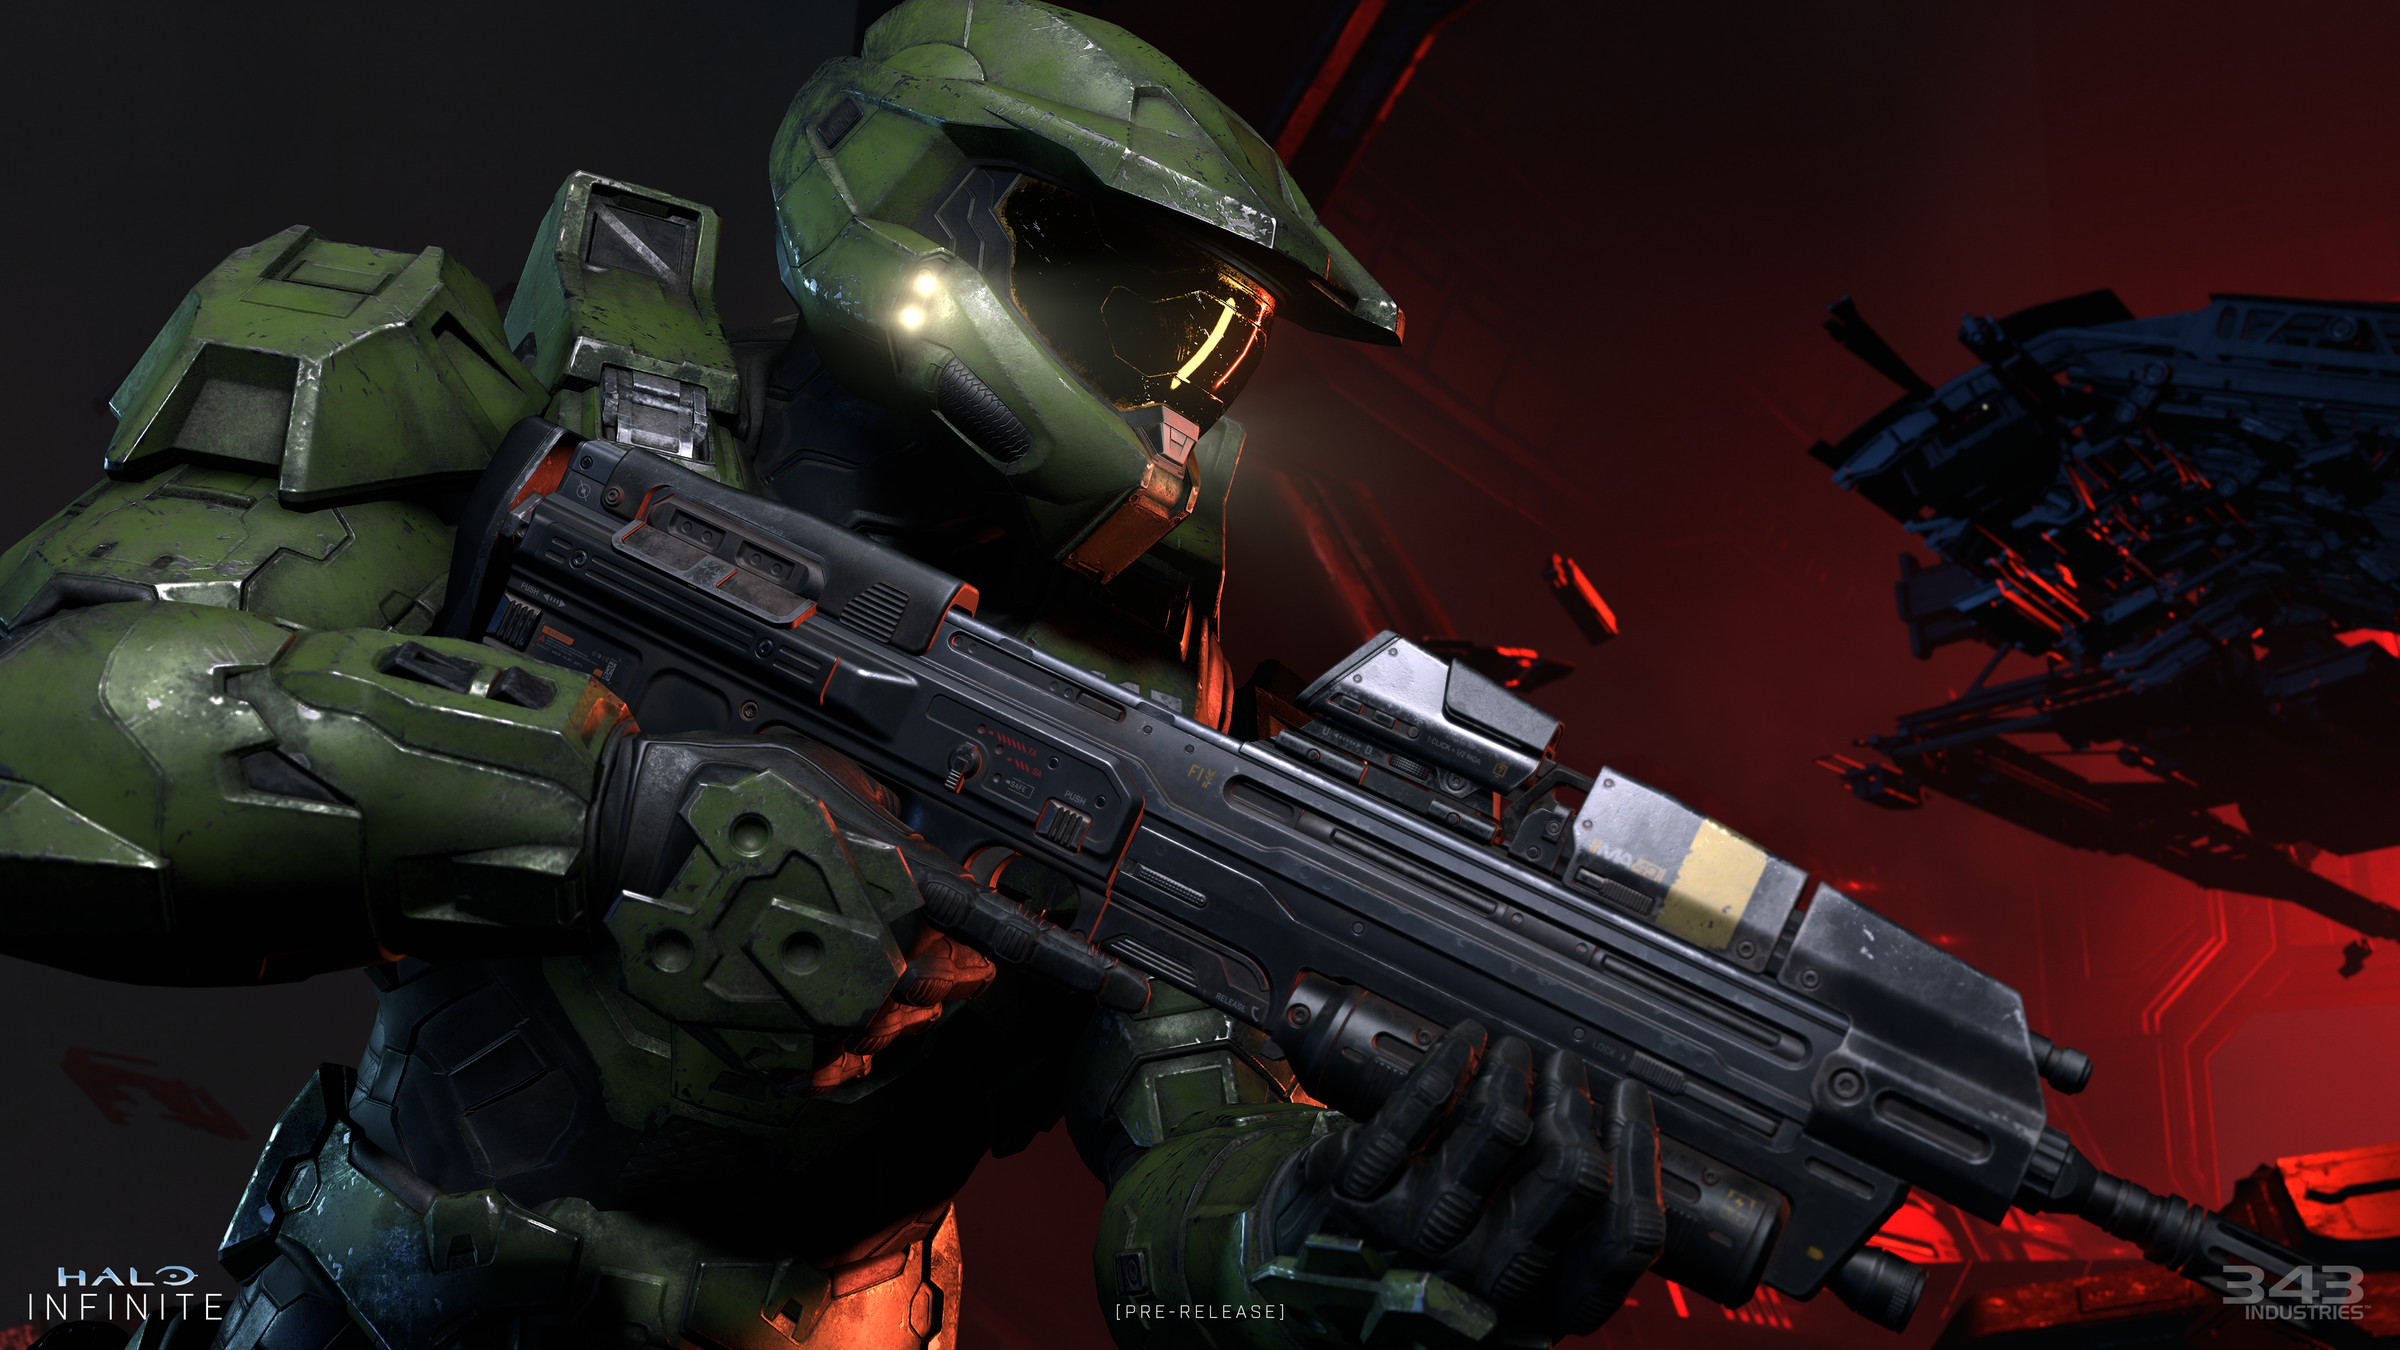 An image showing Master Chief